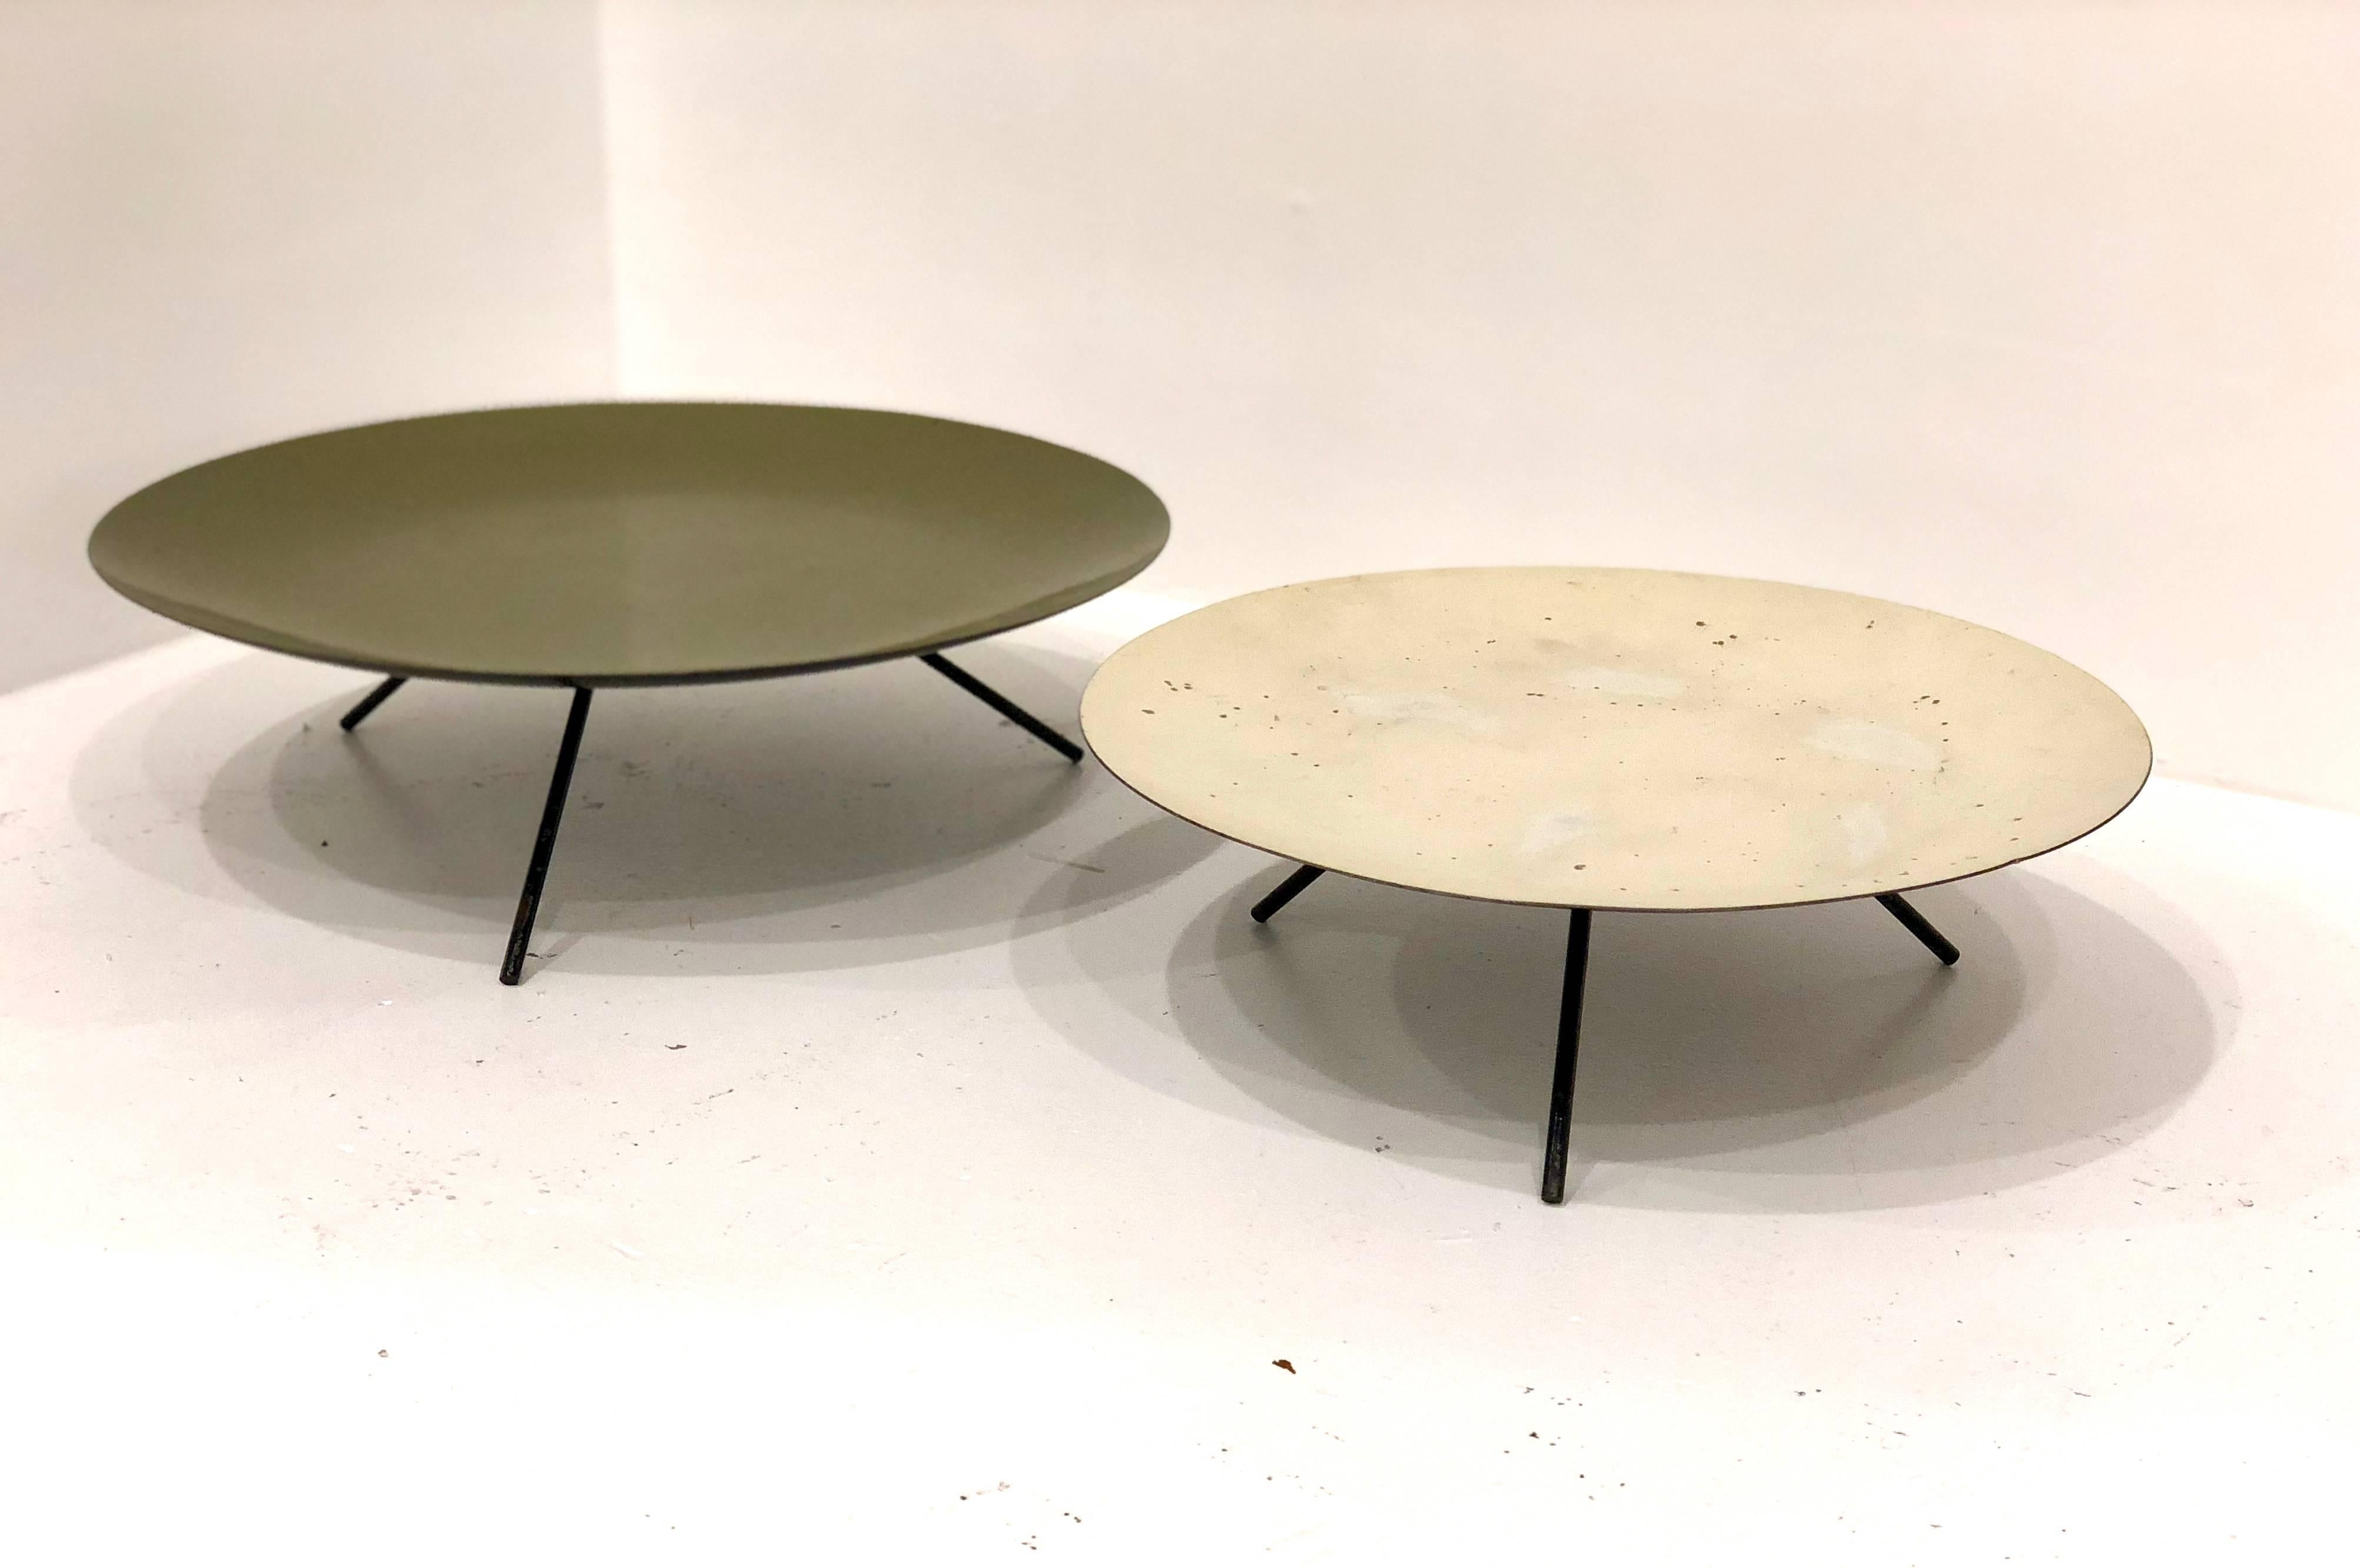 Unique and rare pair of triple legged, serving trays by Trend of California, circa 1950s enameled green and cream tops combo on a mate black bottom, and three mini legs welded two different heights and diameter sold in AS/IS condition rare pieces